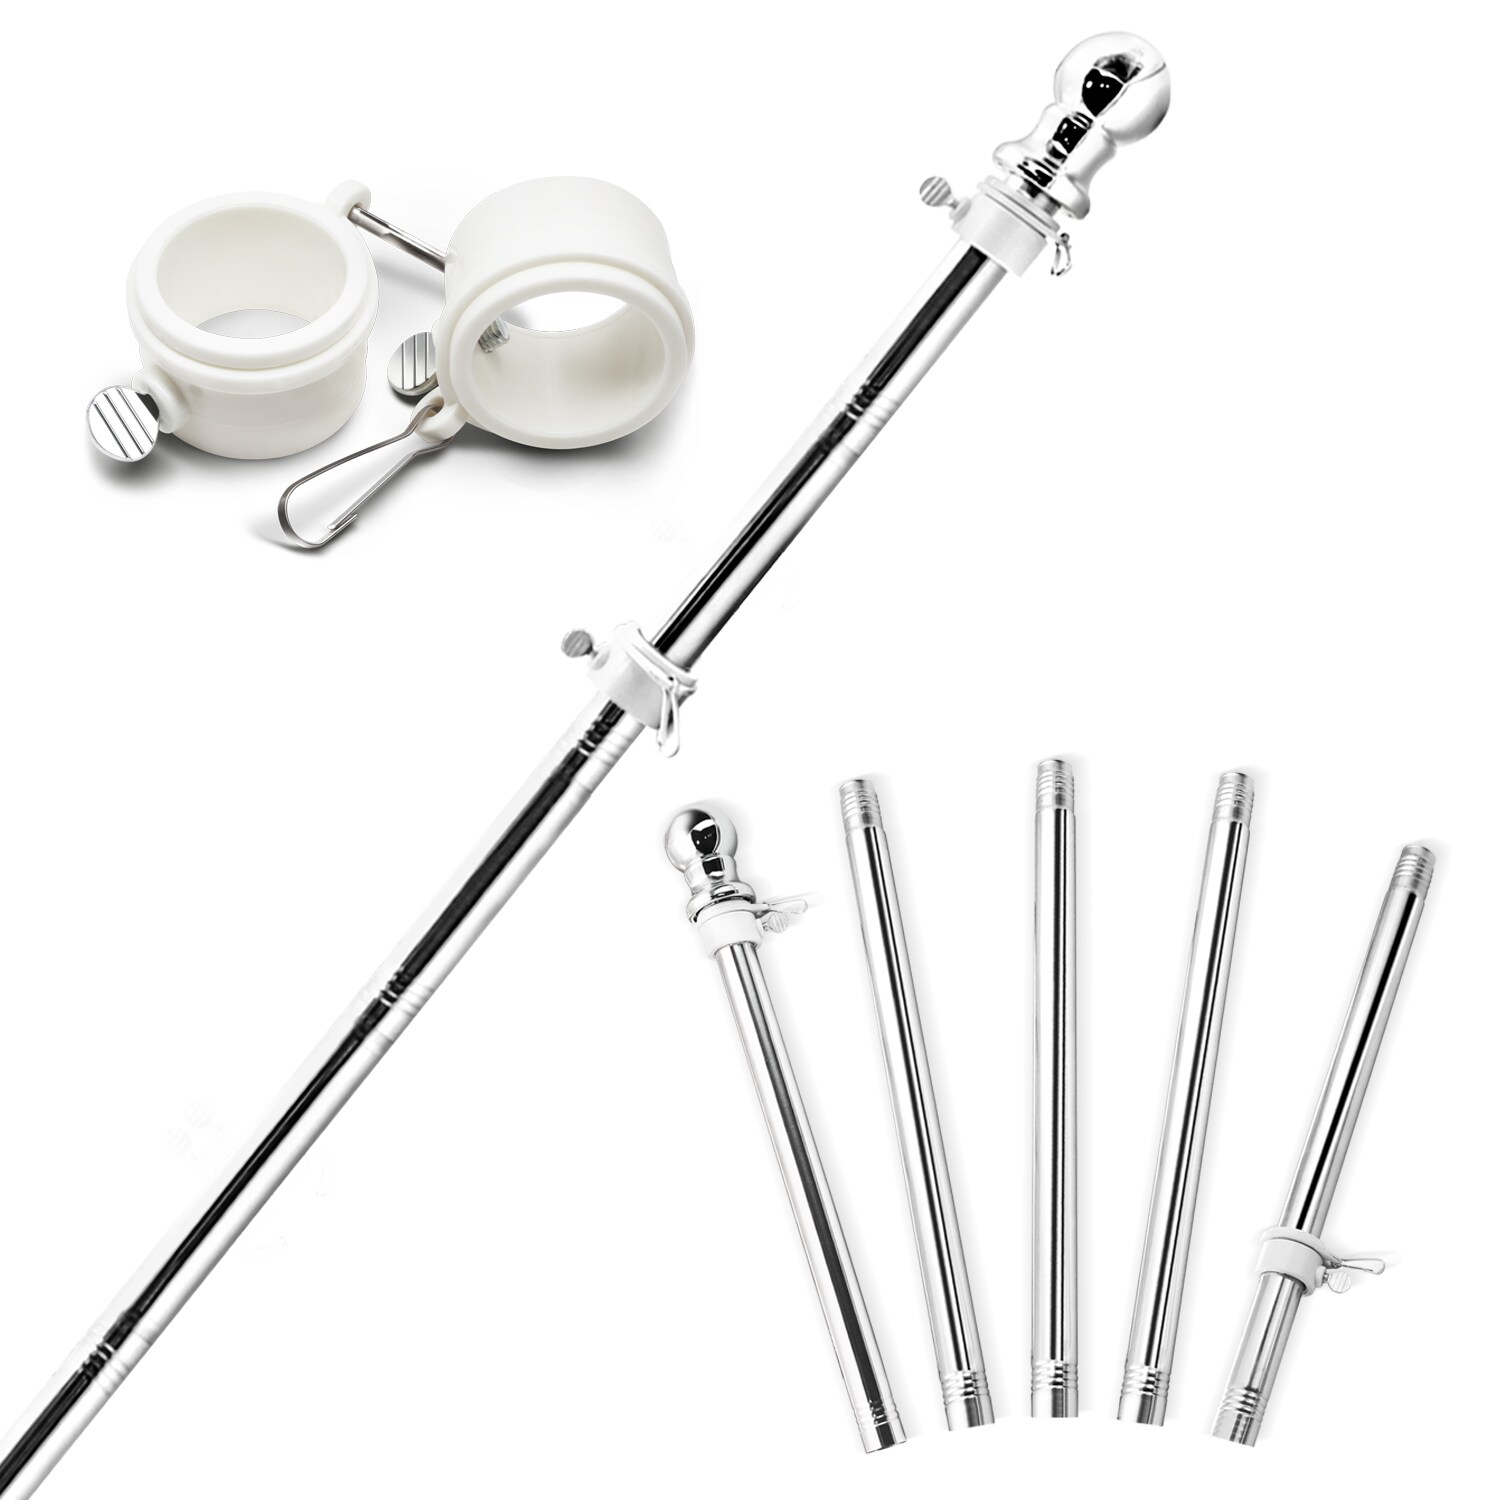 5 FT Heavy Duty Flag Pole Kit Stainless Steel with Rotating Rings Pole Only 